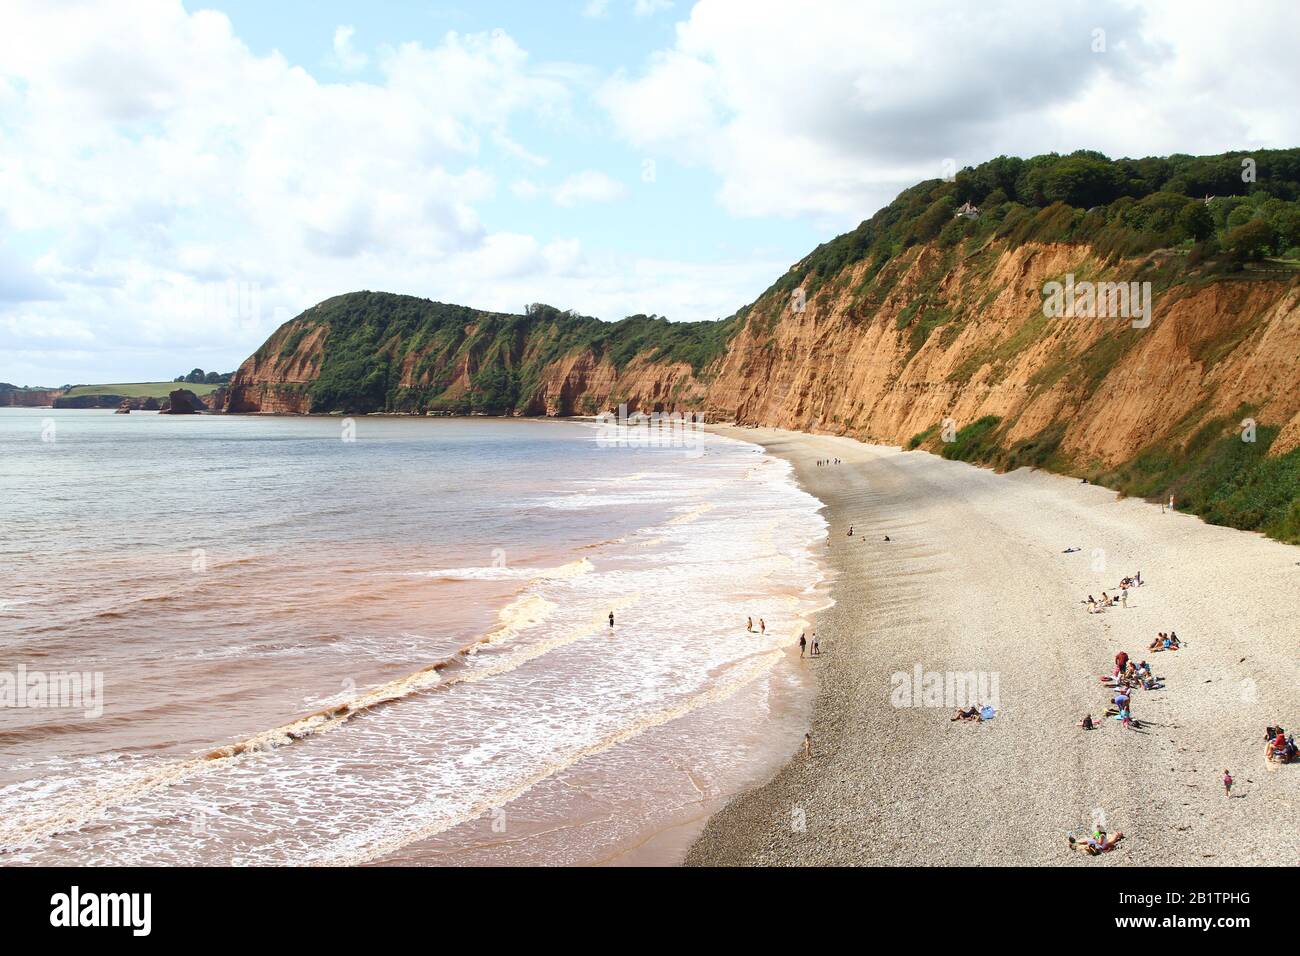 Staycation United Kingdom. Beach scene at Sidmouth, Devon, England. People enjoying the good weather in the South West of England who have decided to reduce their Carbon foot print by not travelling to far flung destinations. Sidmouth is a small coastal town situated of the Jurassic coast. A large part of the town has been designated a conservation area and the Jurassic coast a World heritage site. Stock Photo